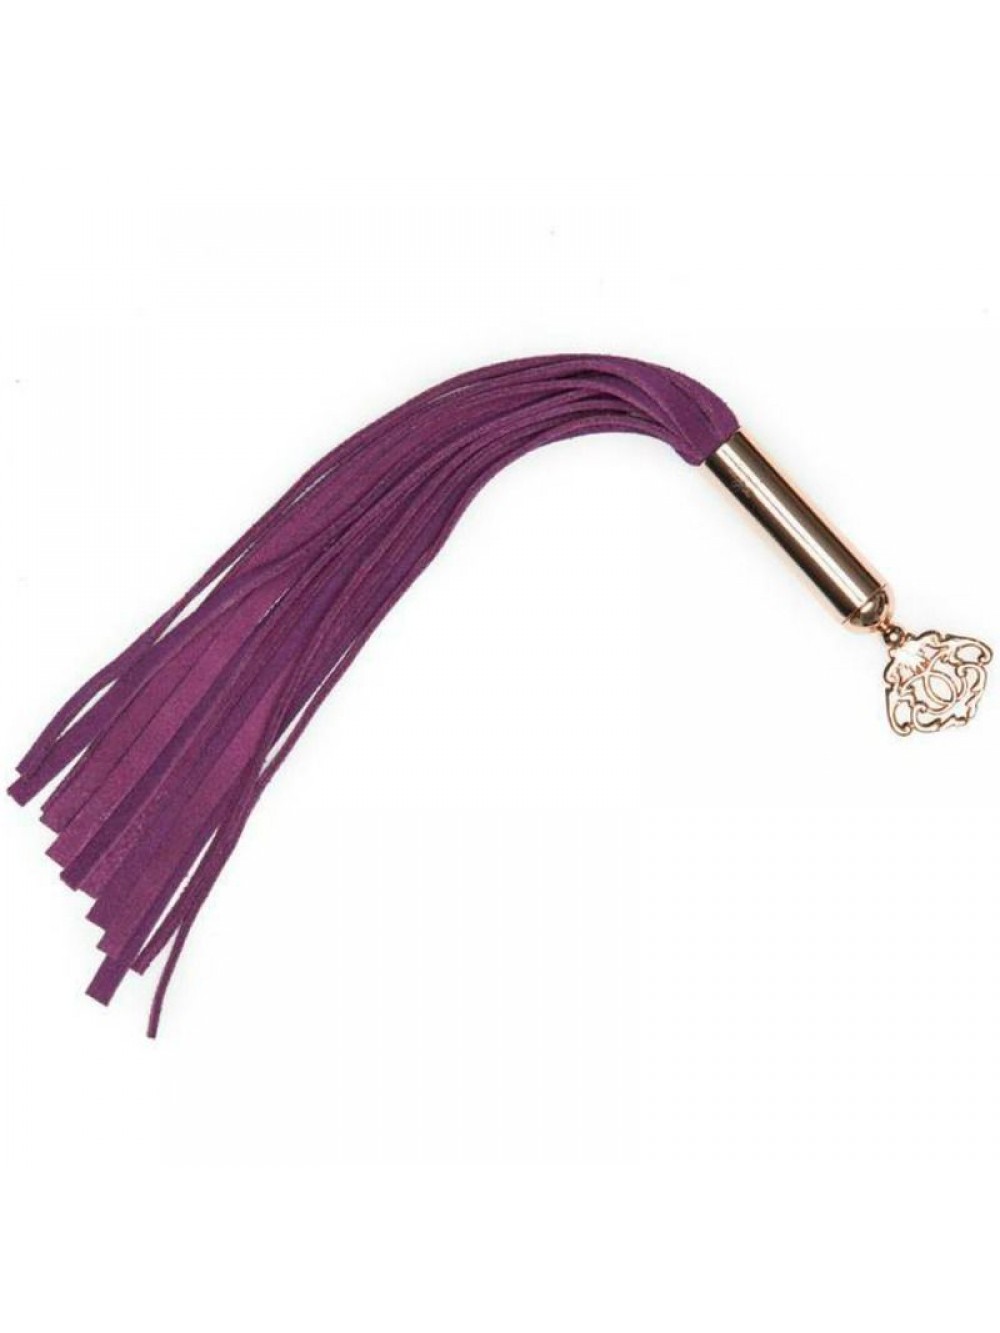 FIFTY SHADES FREED MINI SUEDE FLOGGER 5060493003570